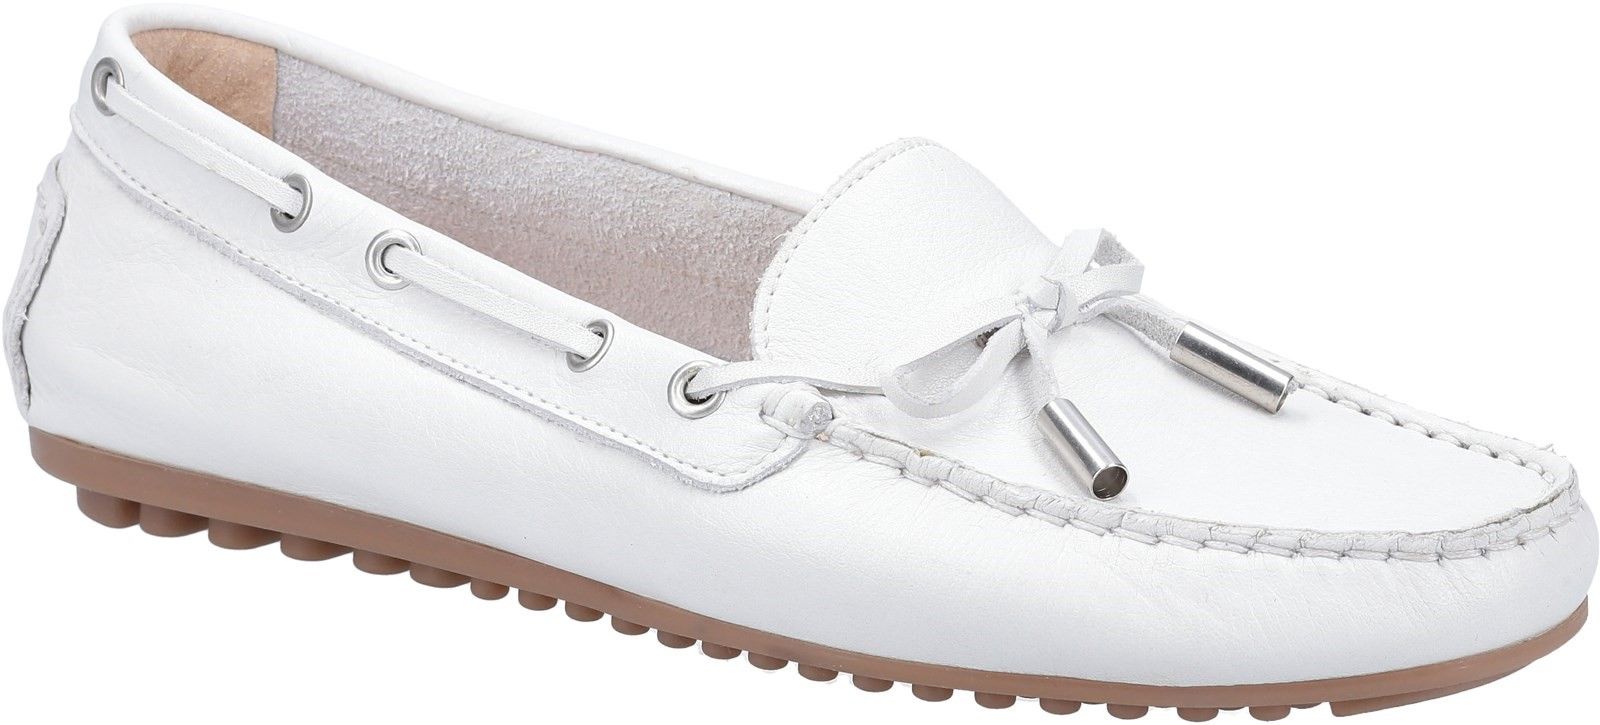 Womens Summer slip on Moccasin from Riva, L'escala is crafted from Portugese Leather featuring a chic bow trim and has a leather insole. Rubber outsole for good grip keeps you on your feet all through those Summer days.Summer Slip On Shoe. 
Portugese Leather Moccasin. 
Bow Trim. 
Leather Insole. 
Hardwearing outsole.